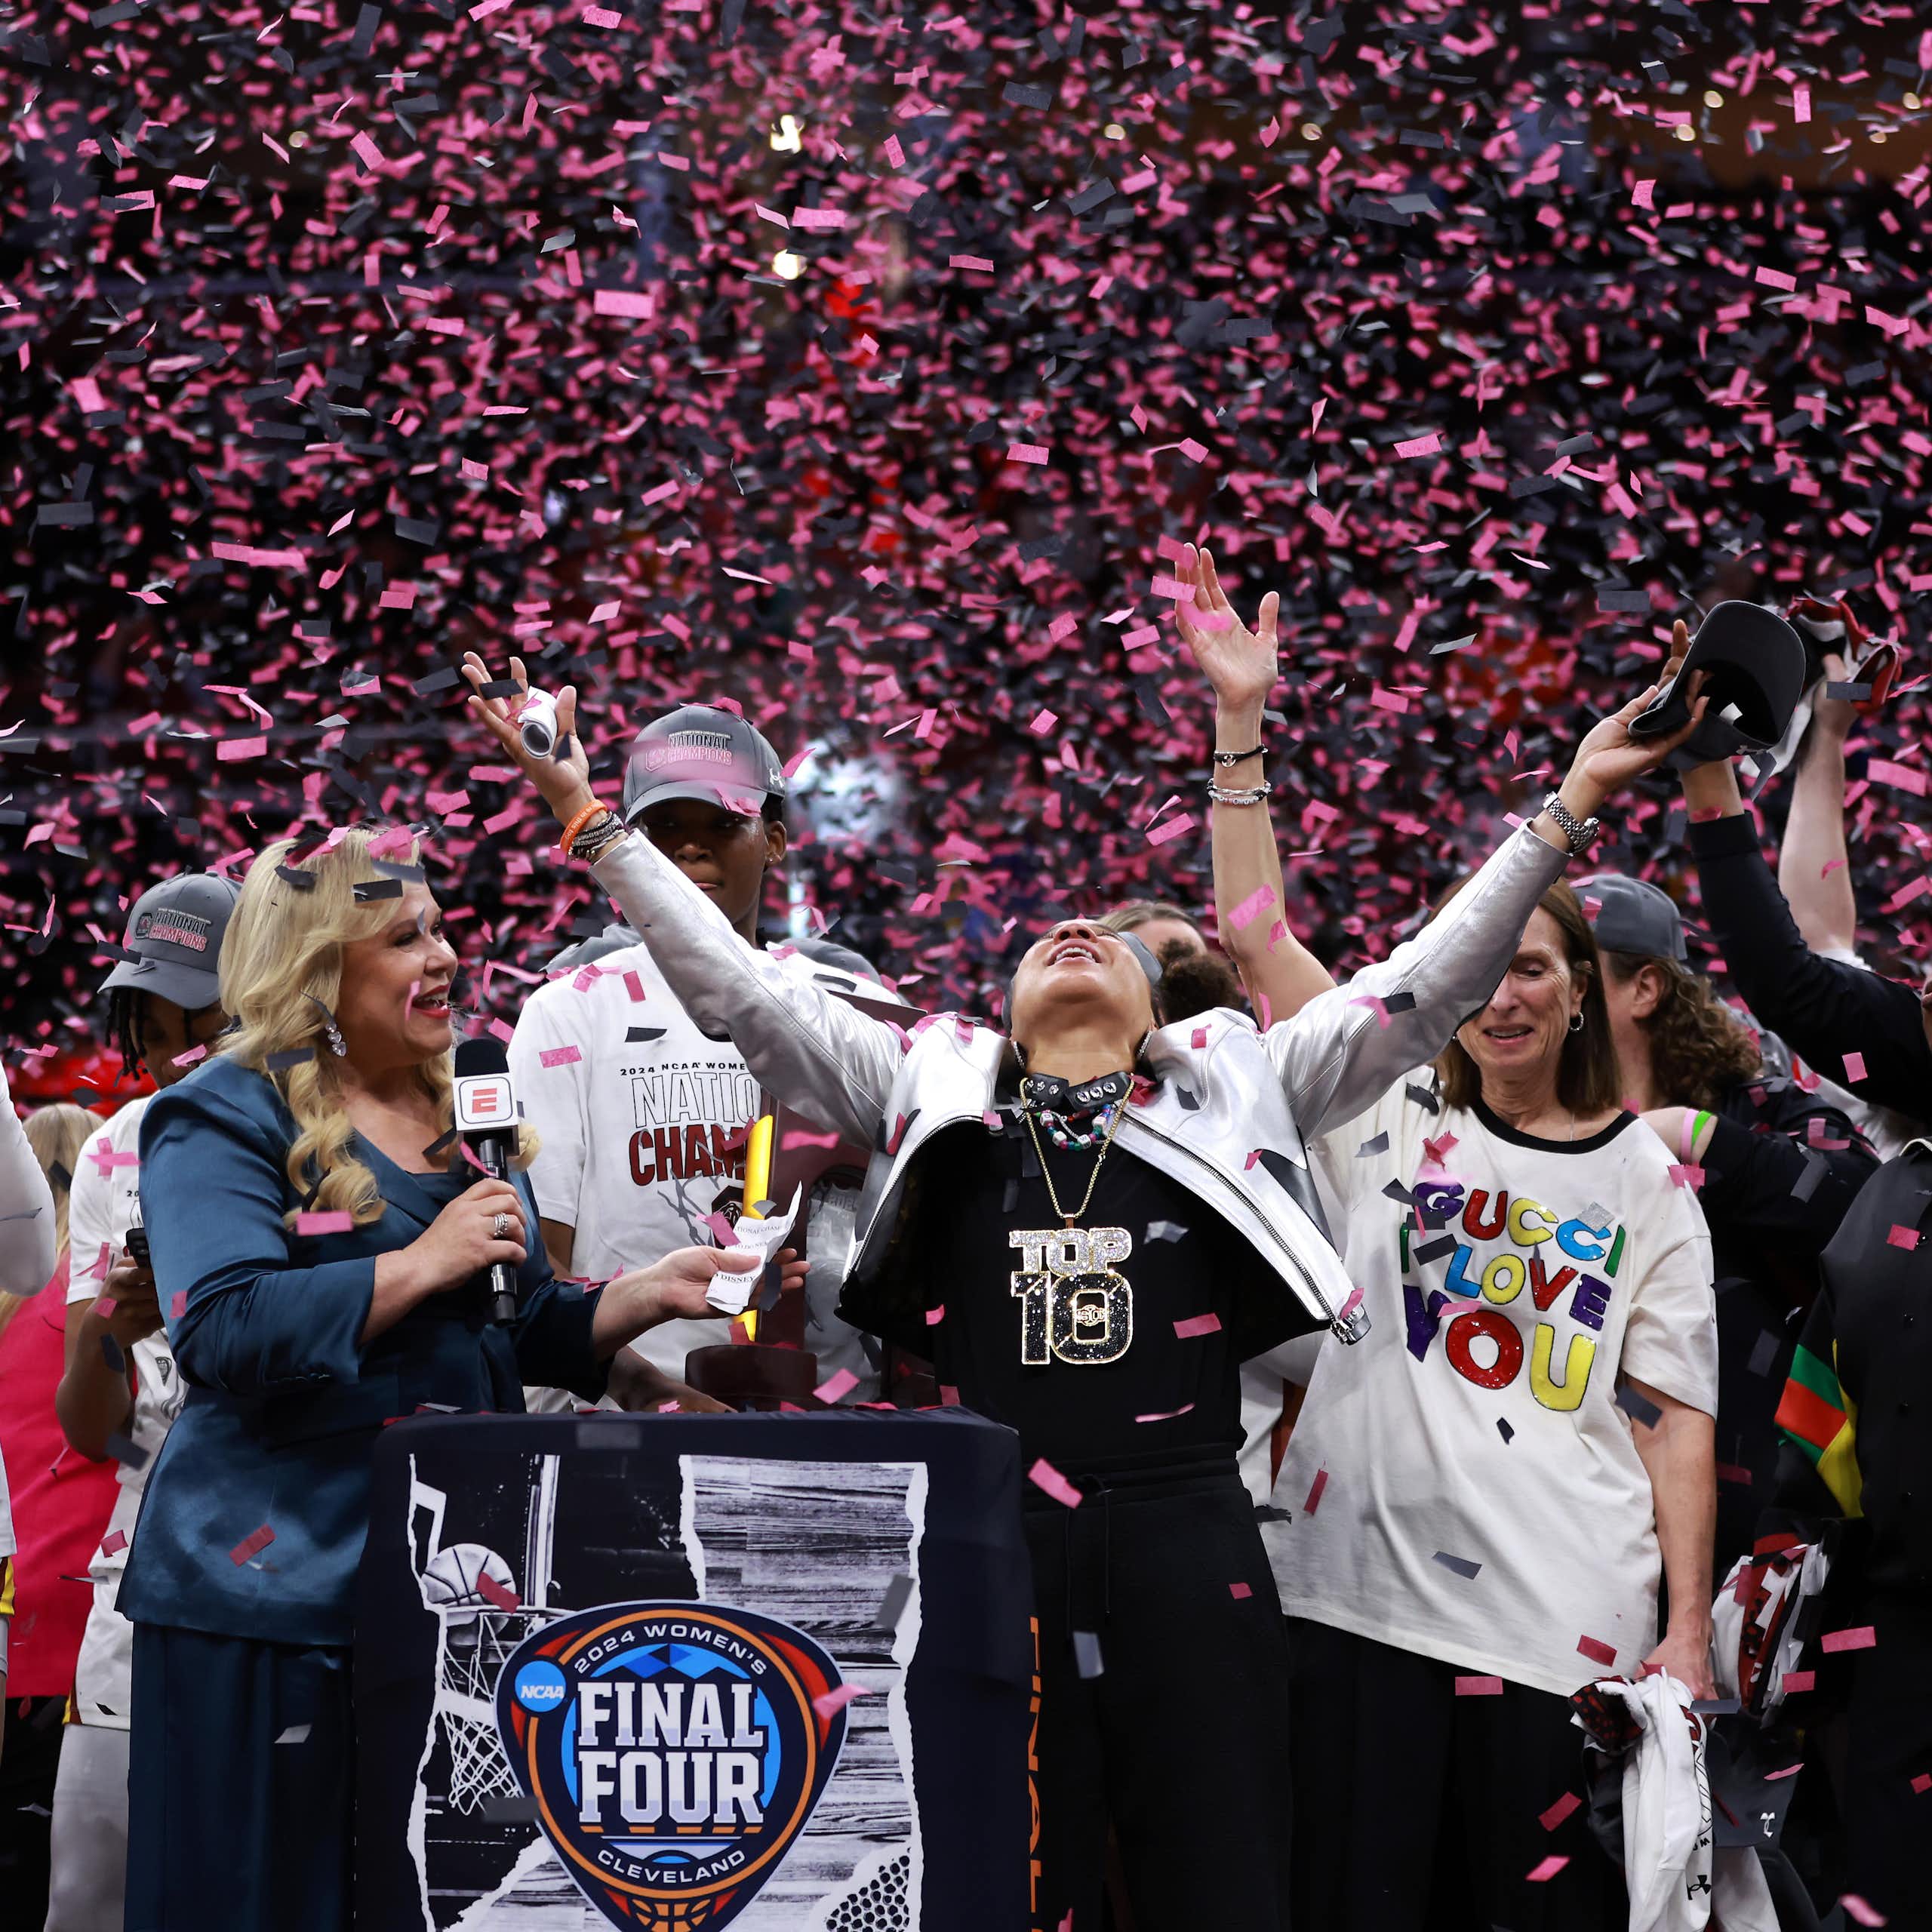 Pink confetti falls from the rafters of a basketball arena as a female coach and her players celebrate.